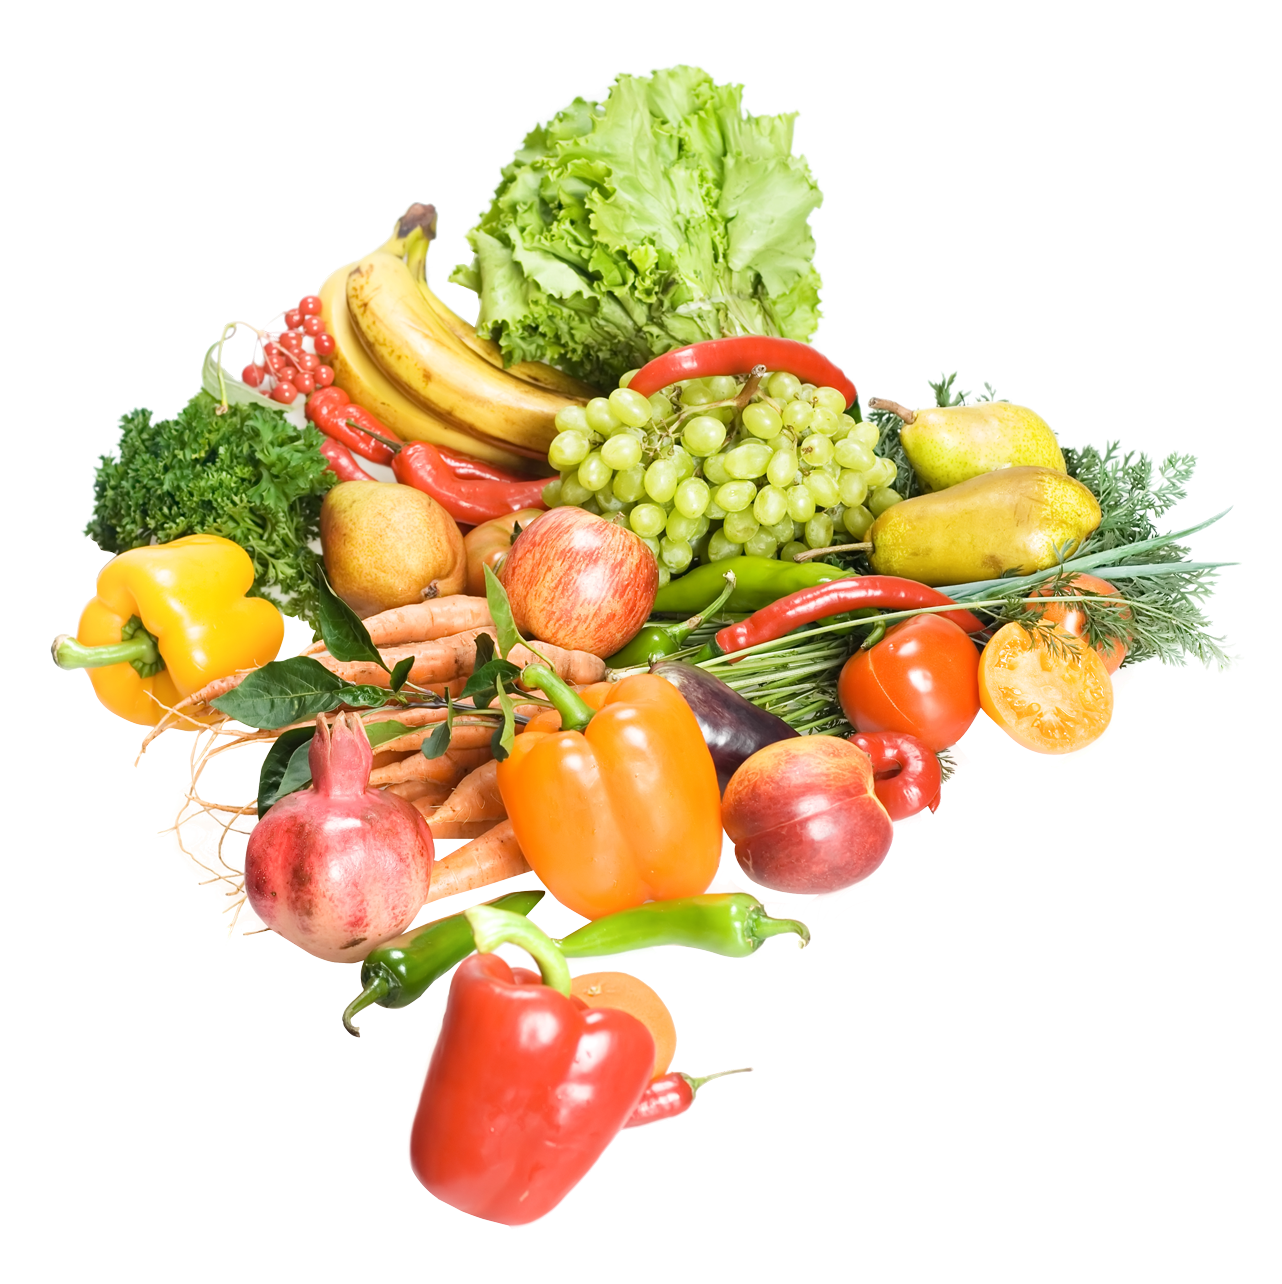 Fruits And Vegetables PNG Image